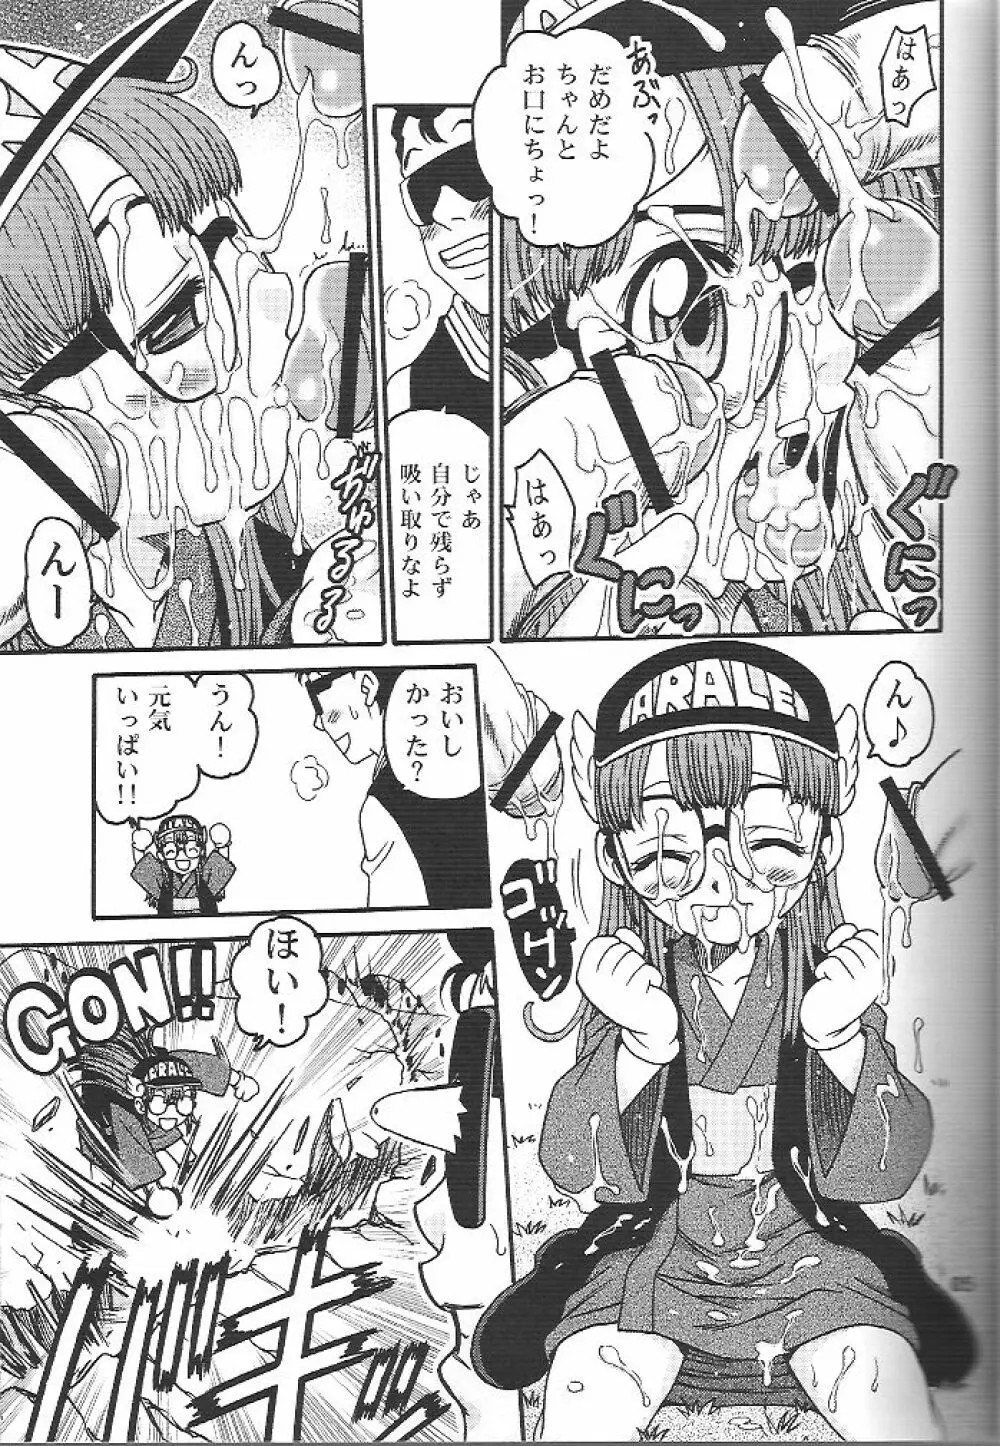 PROJECT ARALE 2 - page4